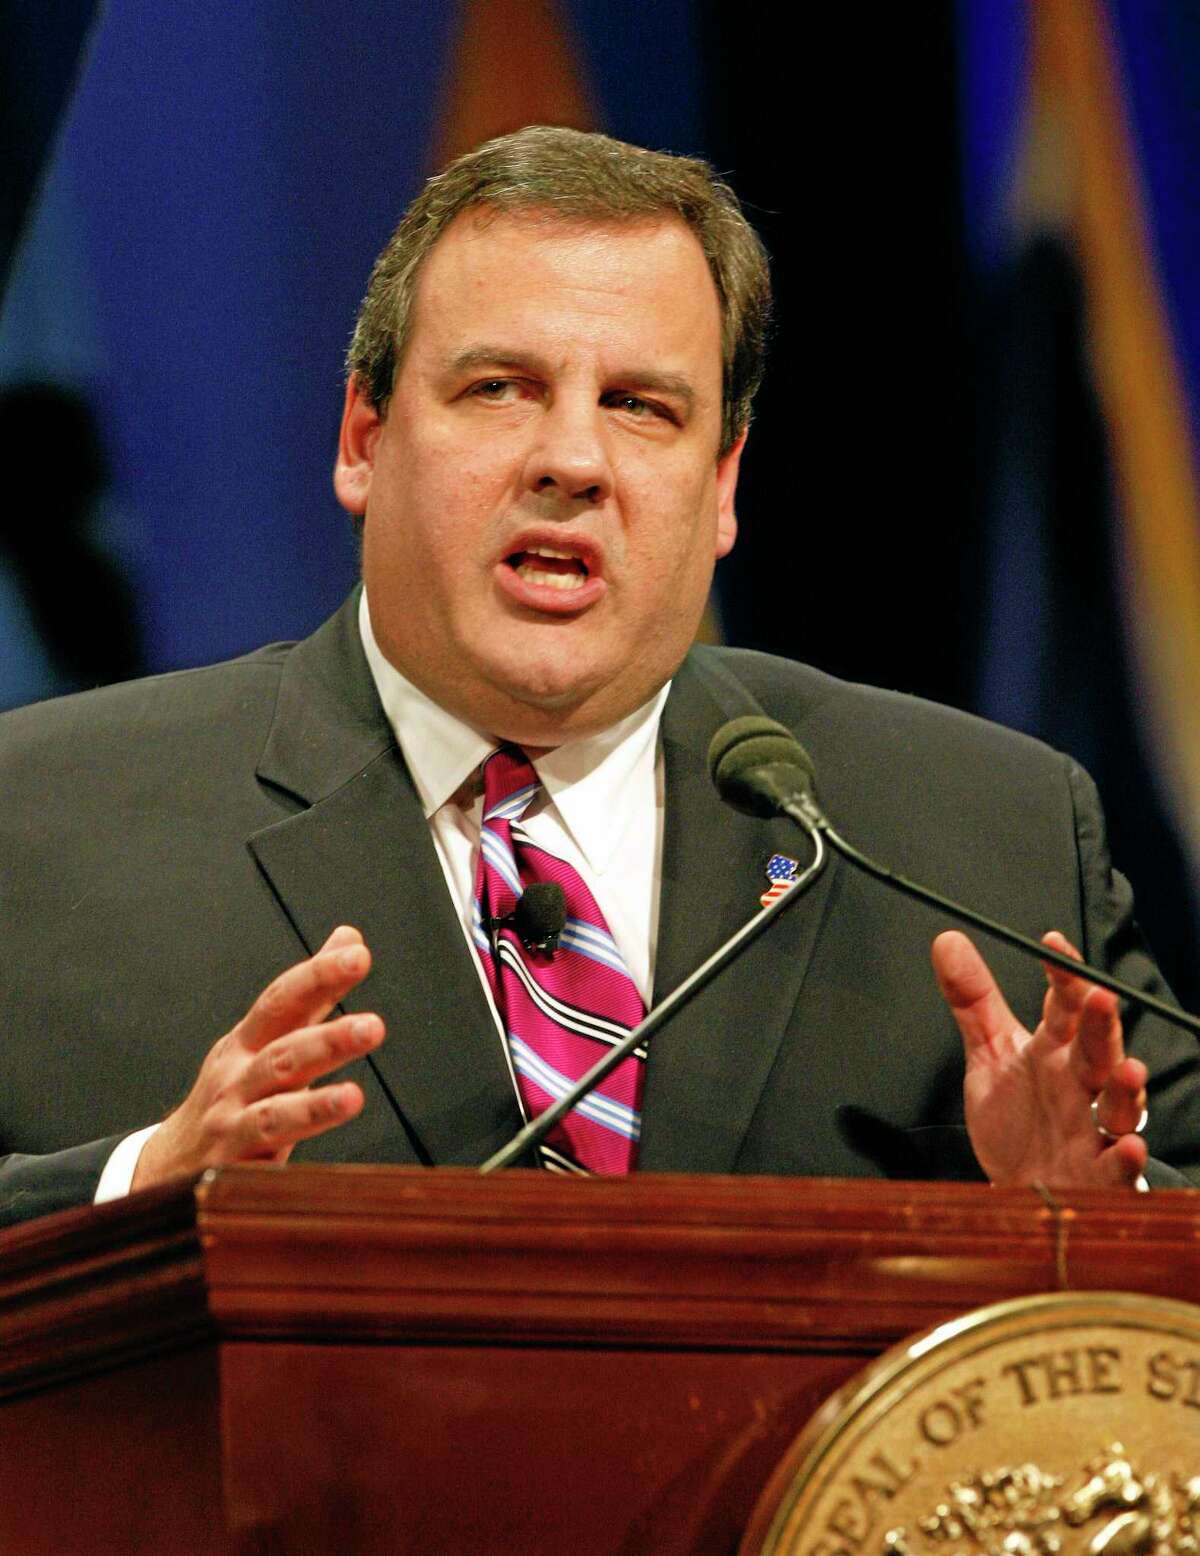 File- This Jan. 19, 2010, file photo shows New Jersey Gov. Chris Christie speaking during his inauguration ceremony, in Trenton, N.J. A day of celebration at the start of Gov. Christieís second term could be tempered by multiple investigations into traffic tie-ups that appear to have been ordered by his staff for political retribution. The governor is still holding all the customary events the Tuesday Jan. 21, 2014, inauguration. (AP Photo/Mel Evans, File)